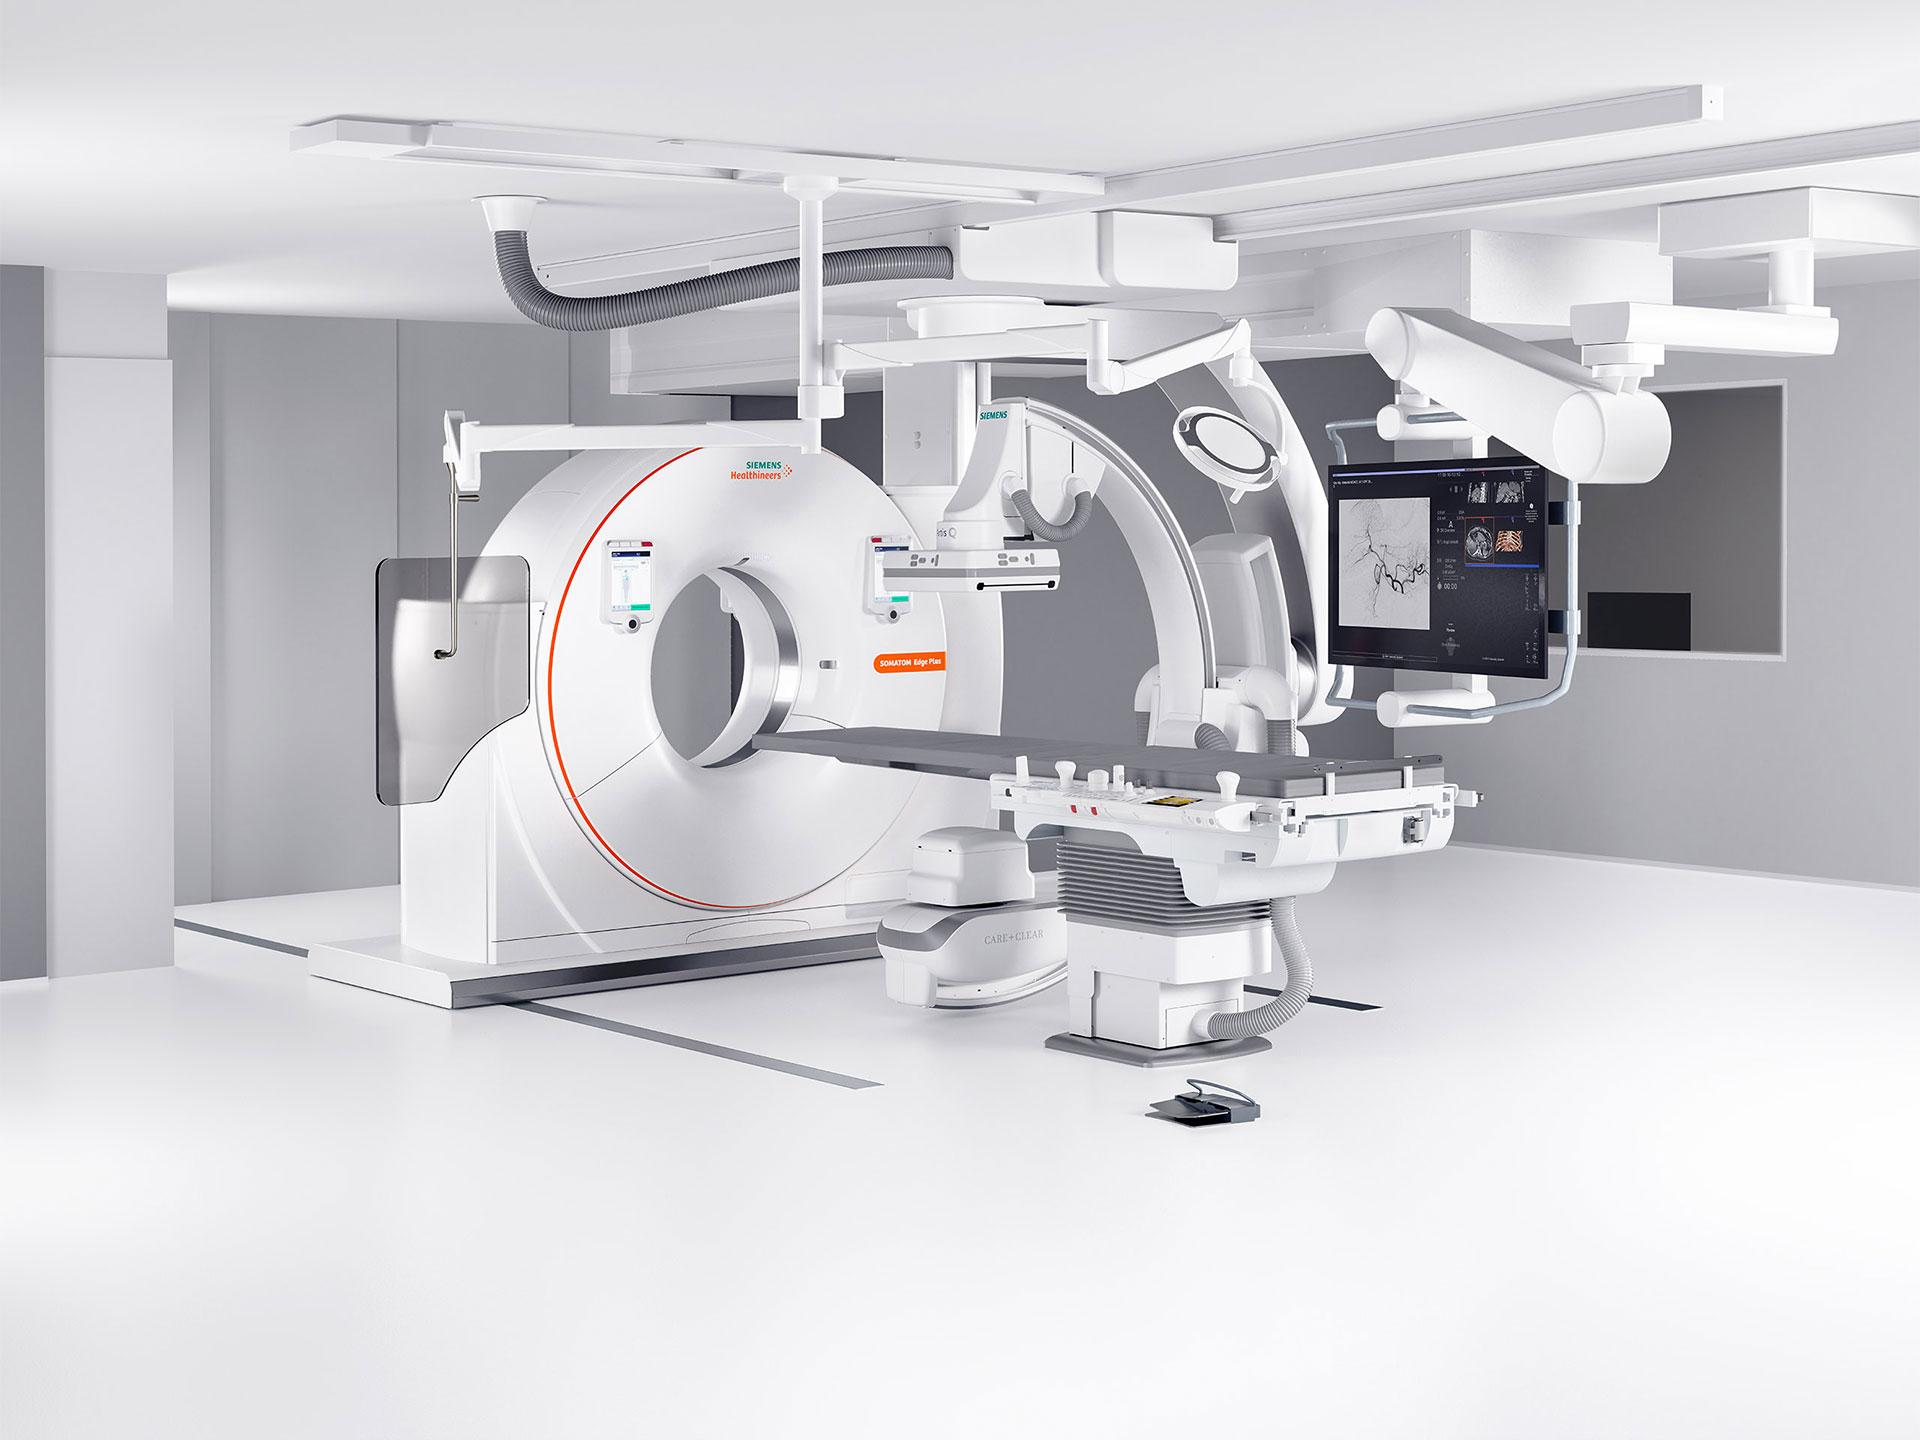 AT_IR-Hybrid-Suites_nexaris-Angio-CT_image_Overview-1_System_4_3_1800000004384021